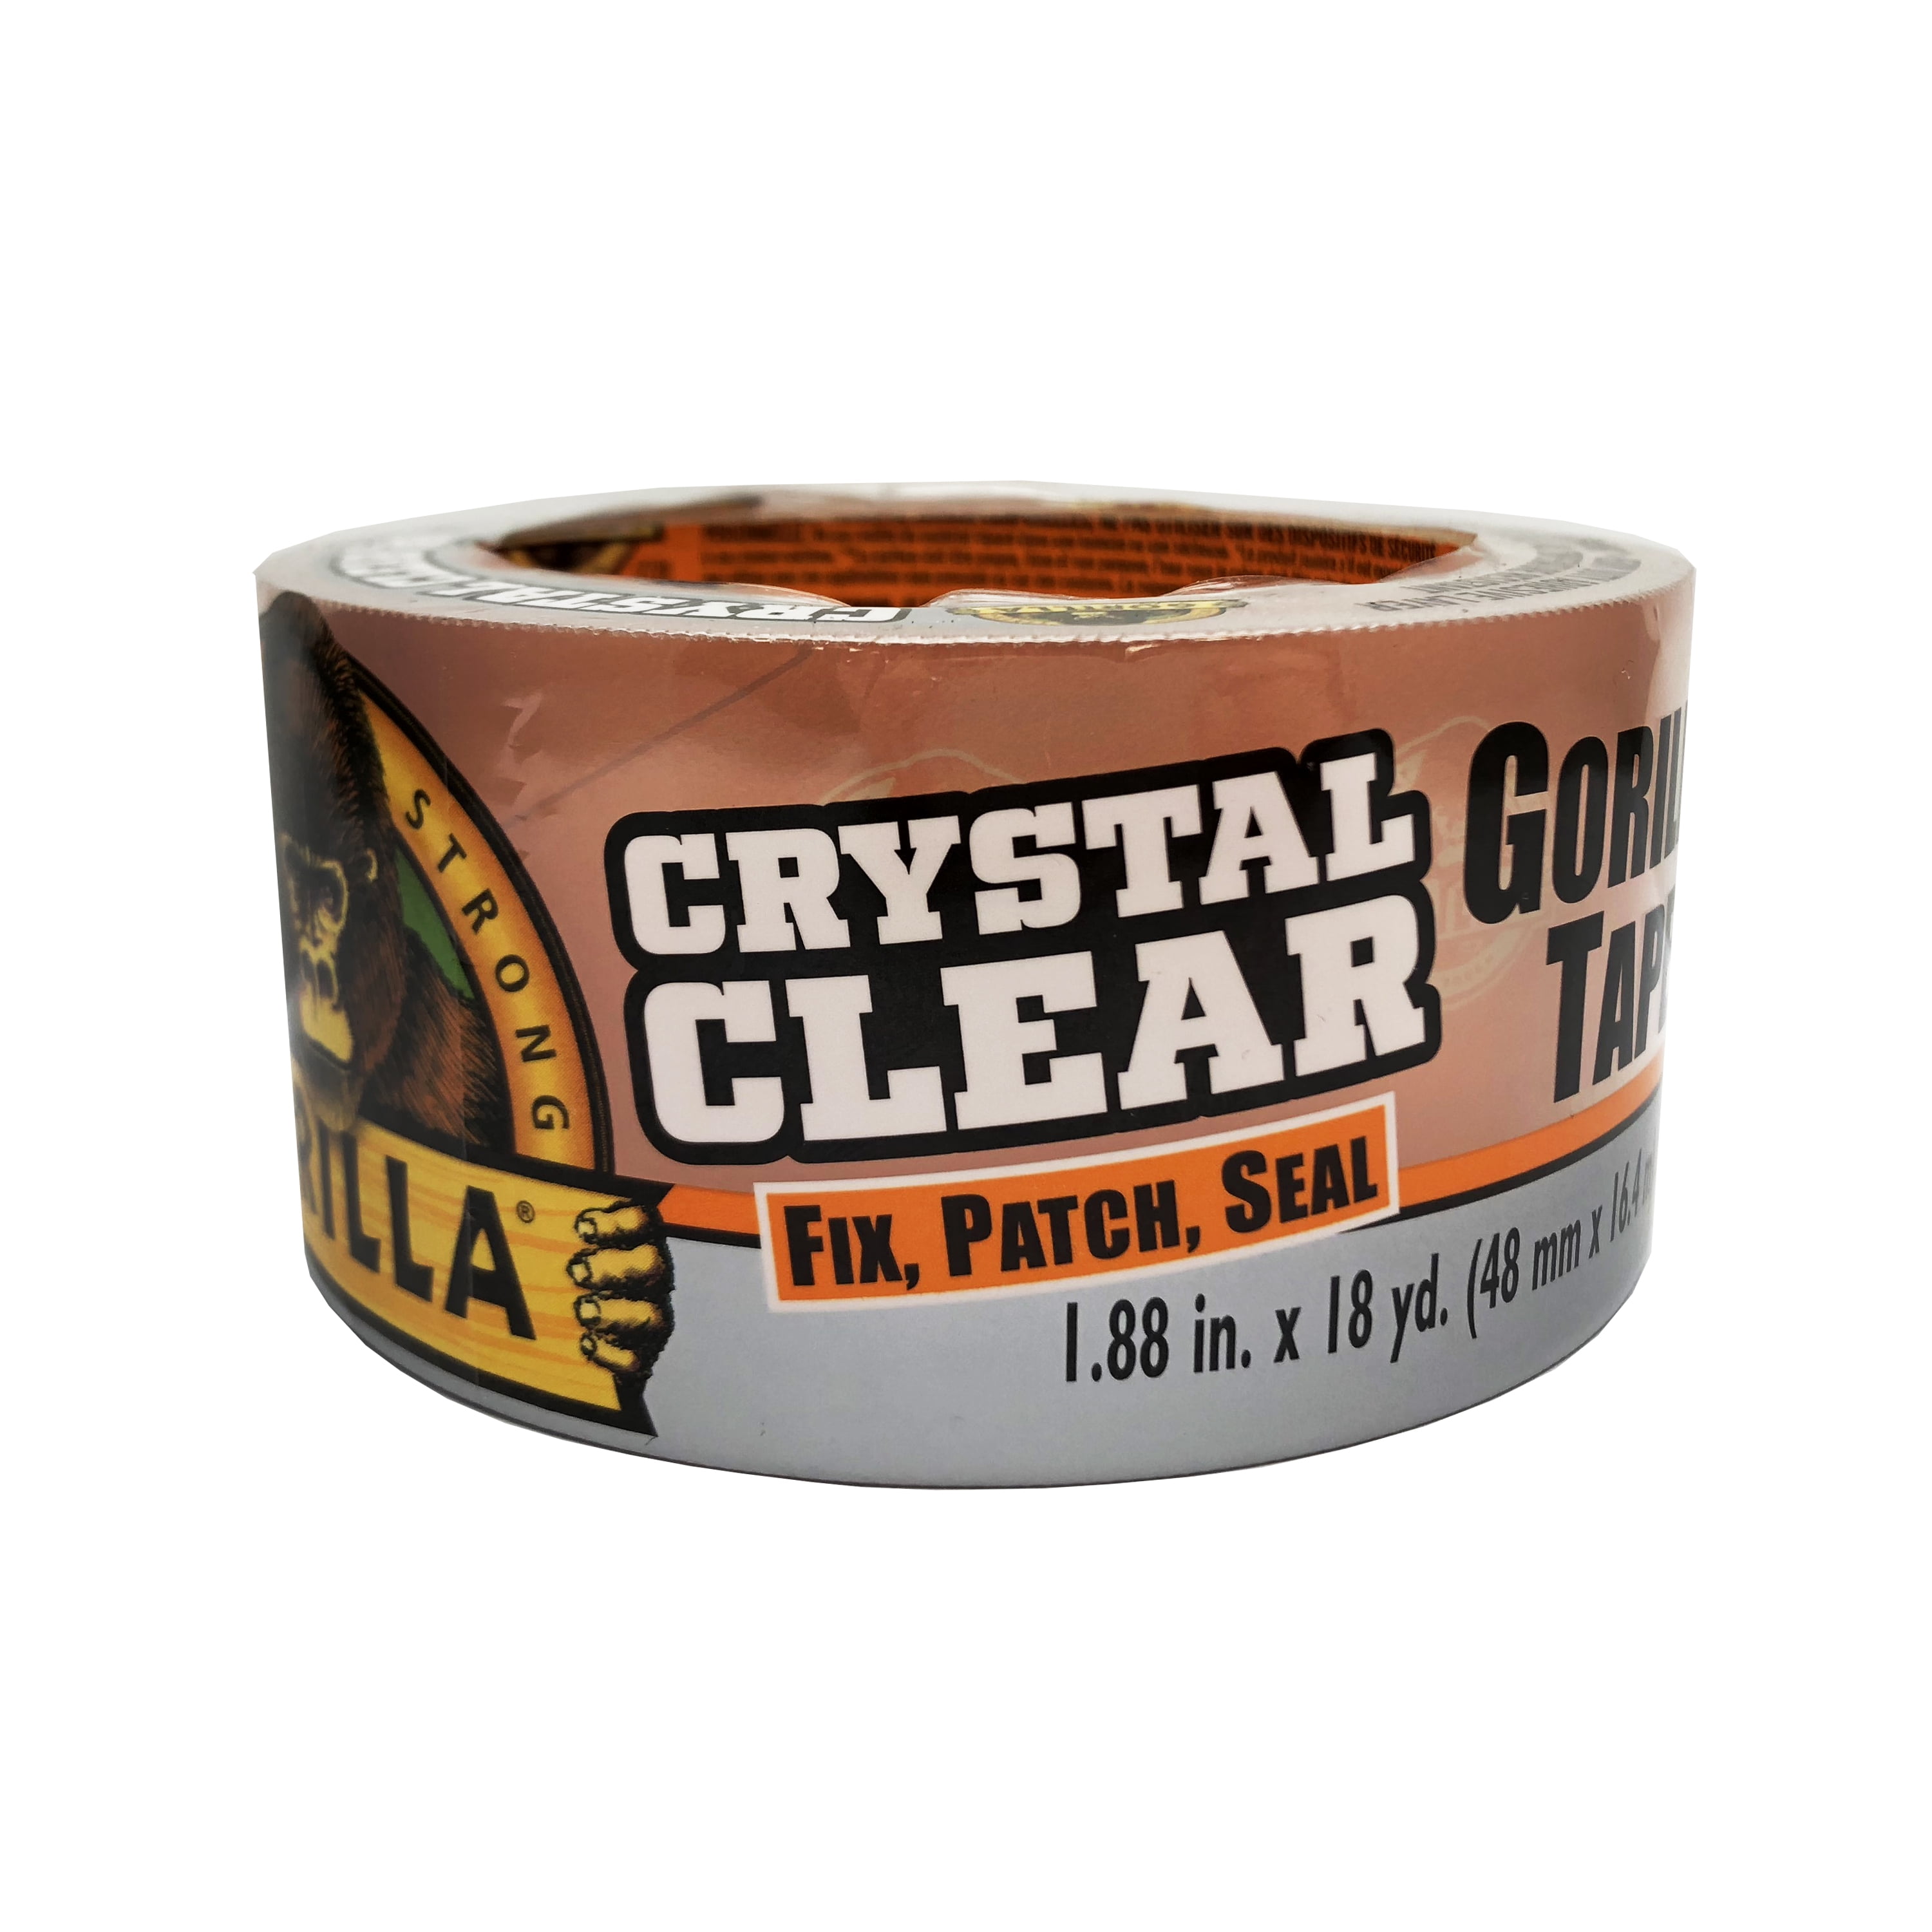 Clear, Pack of 1 - 6027002 Gorilla Crystal Clear Duct Tape 1.88” x 9 yd 